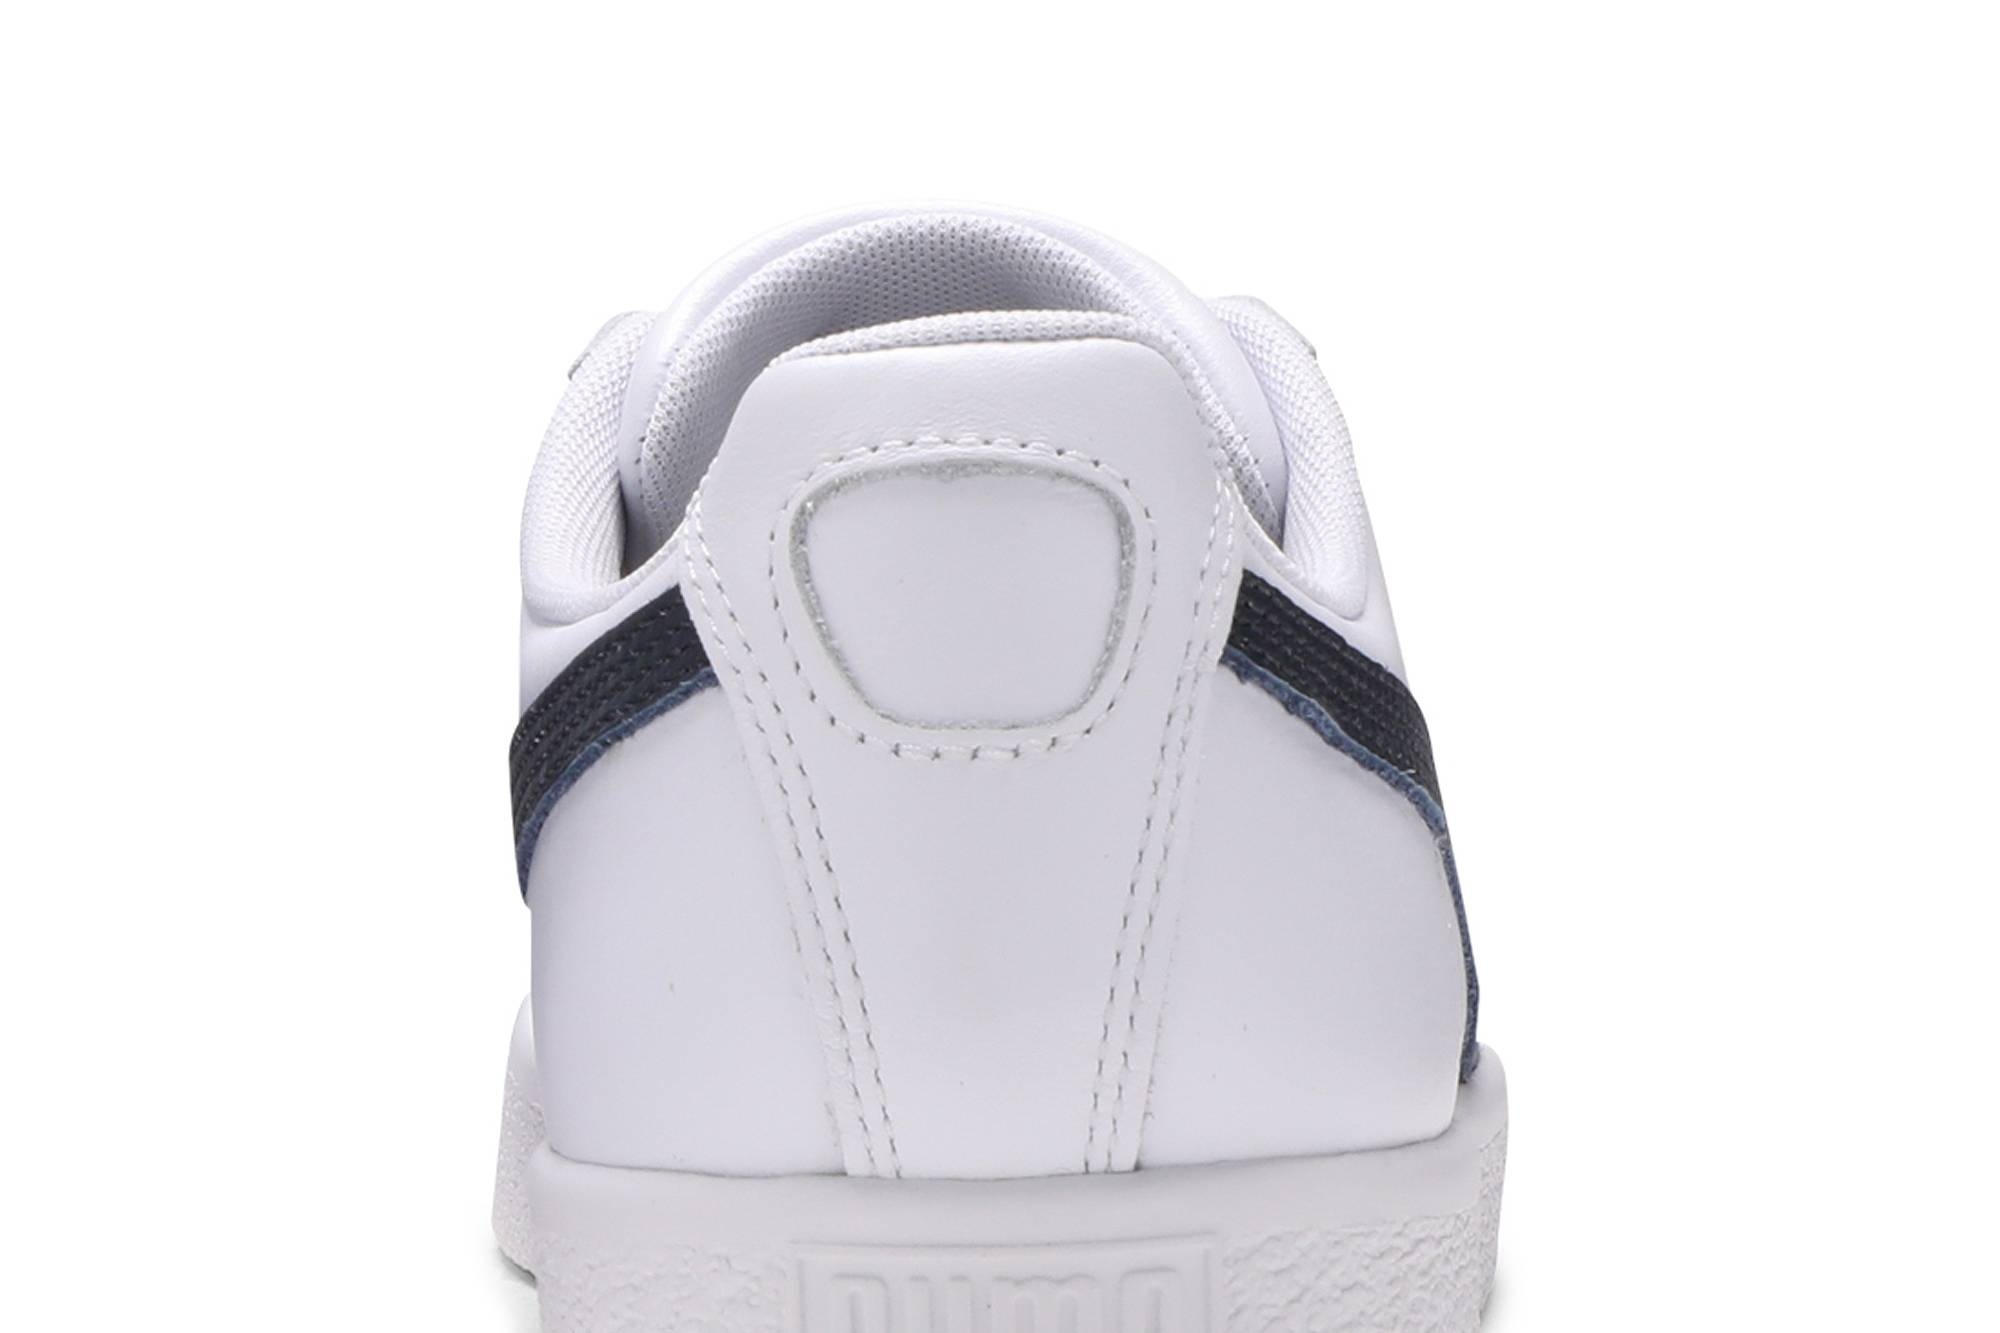 Clyde Core Leather Foil 'White Navy' - 7